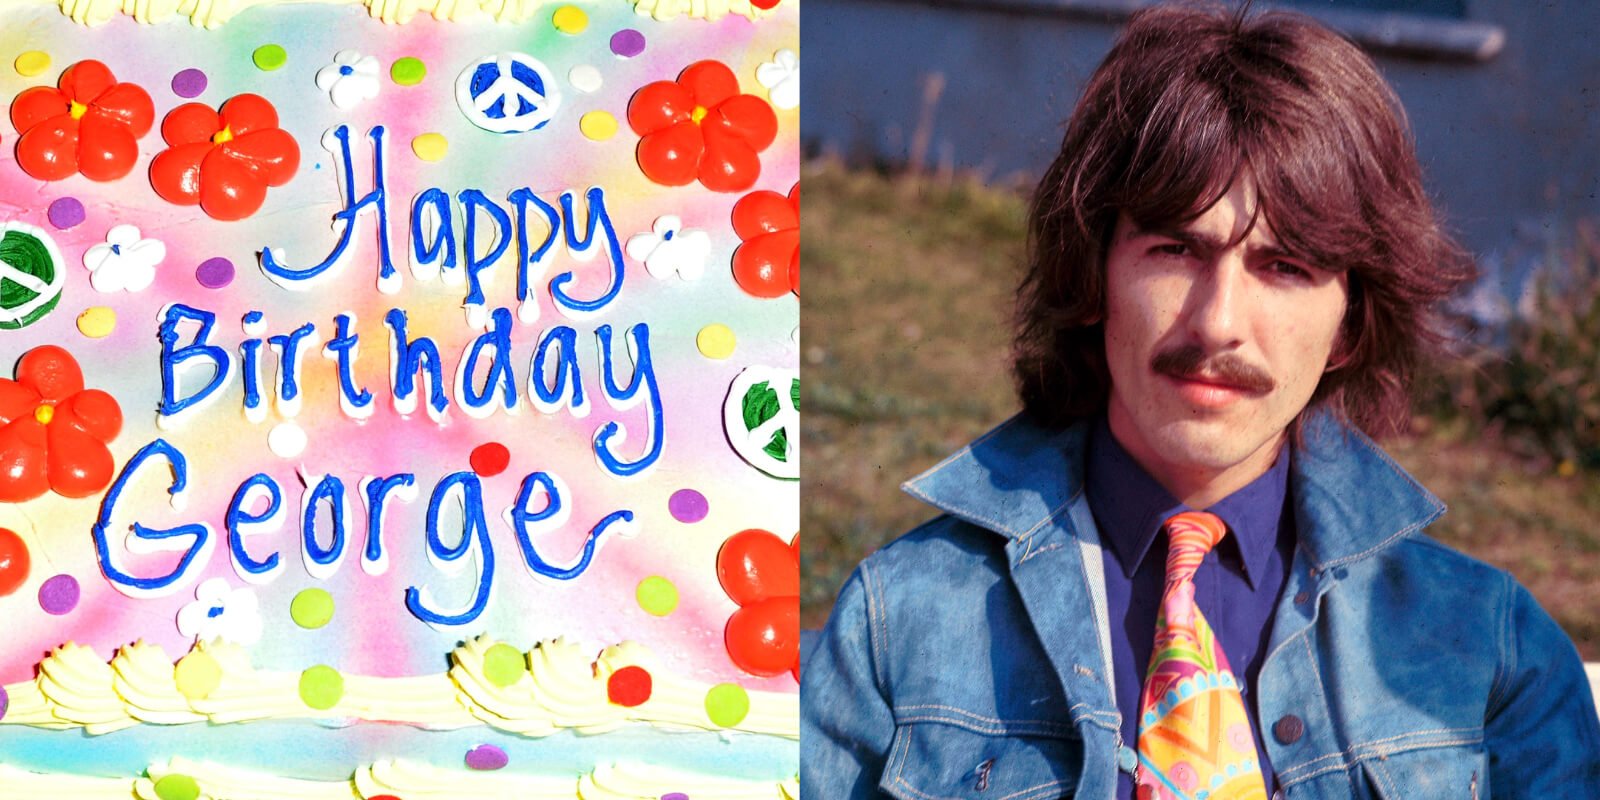 Side-by-side photos of a birthday cake and The Beatles' George Harrison.